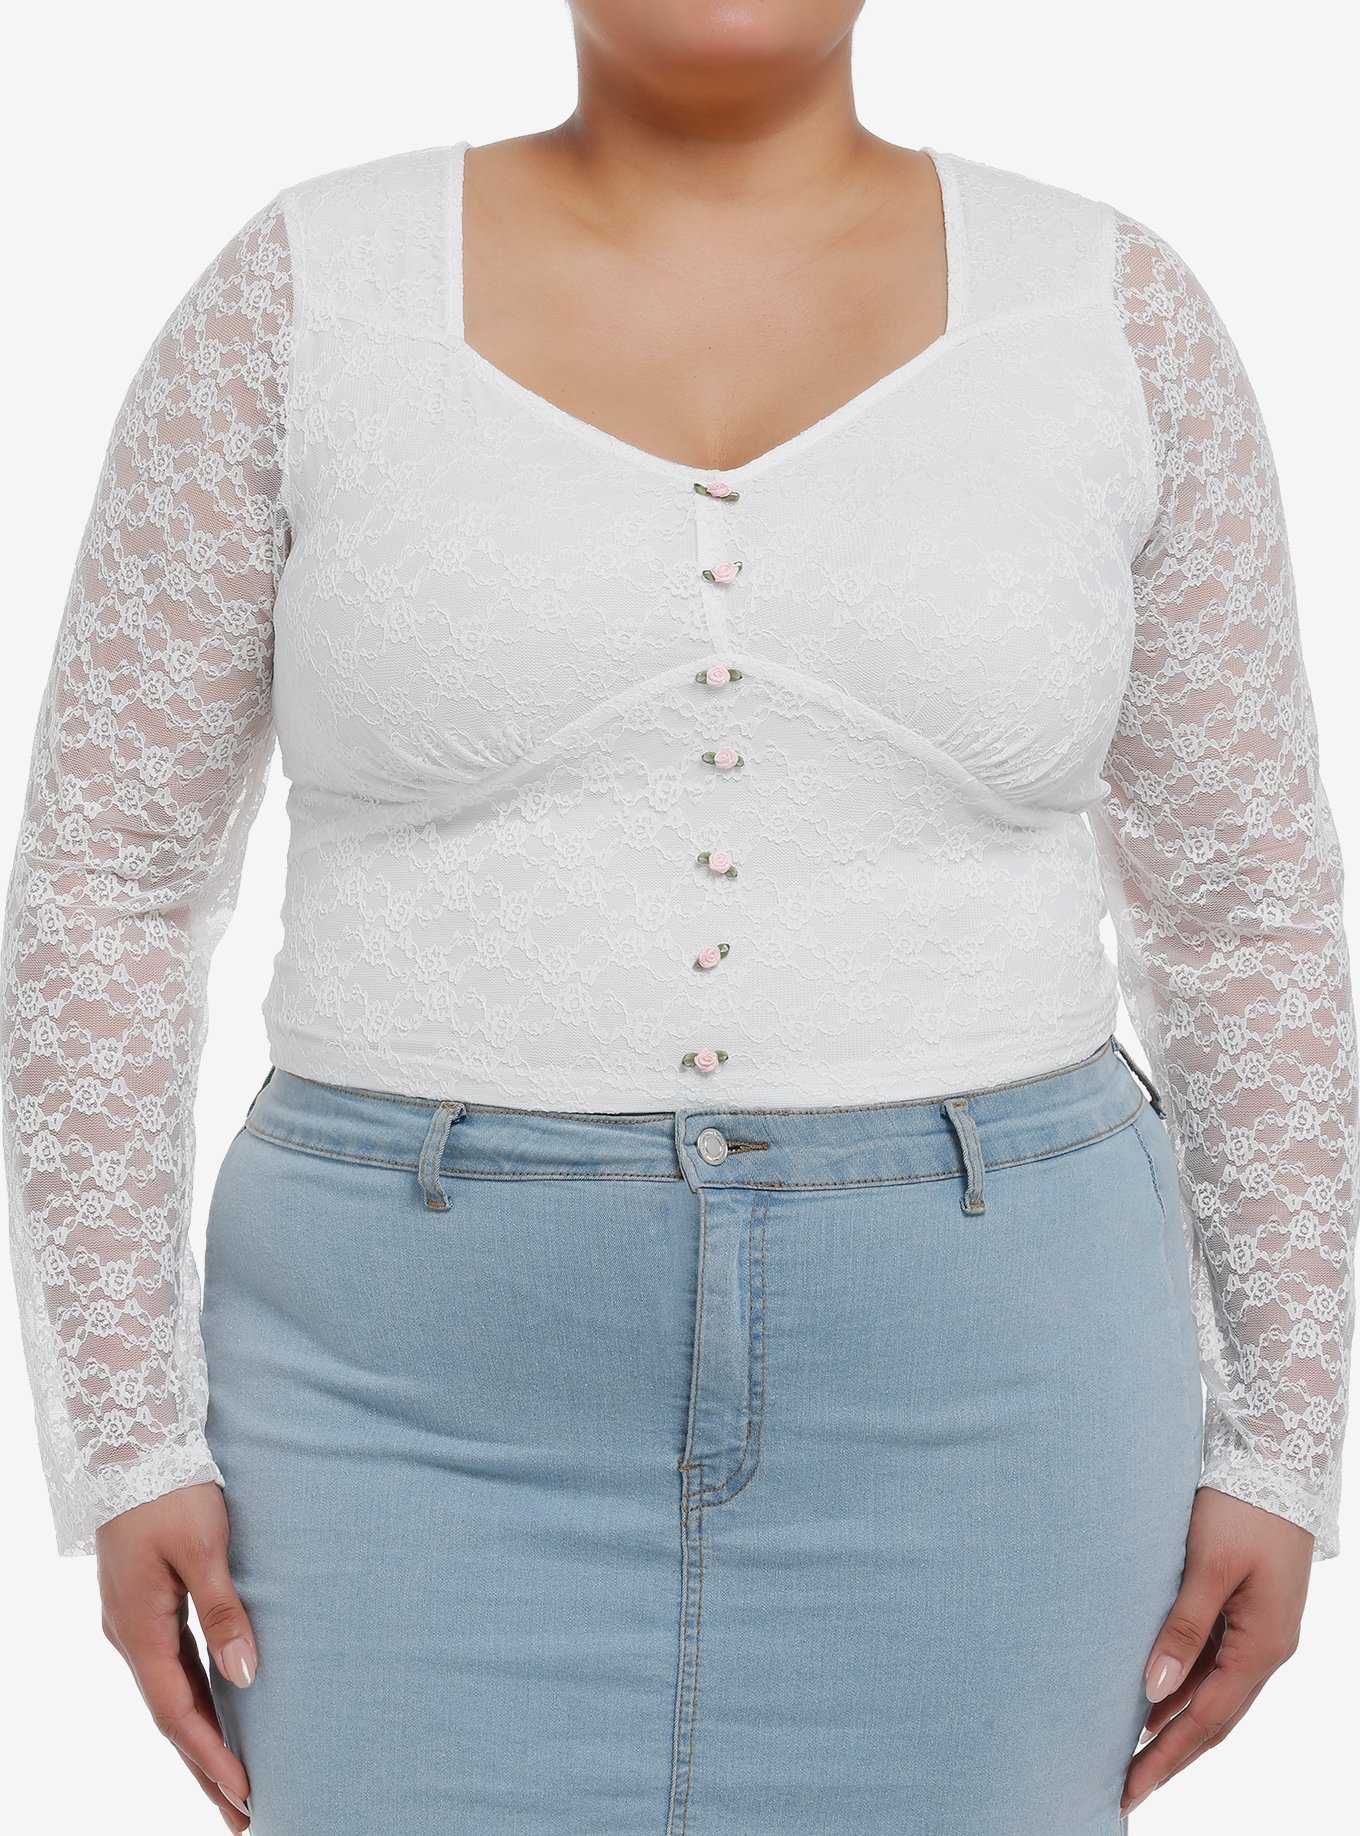 Daisy Street White Lace Rosette Girls Long-Sleeve Top Plus Size, , hi-res